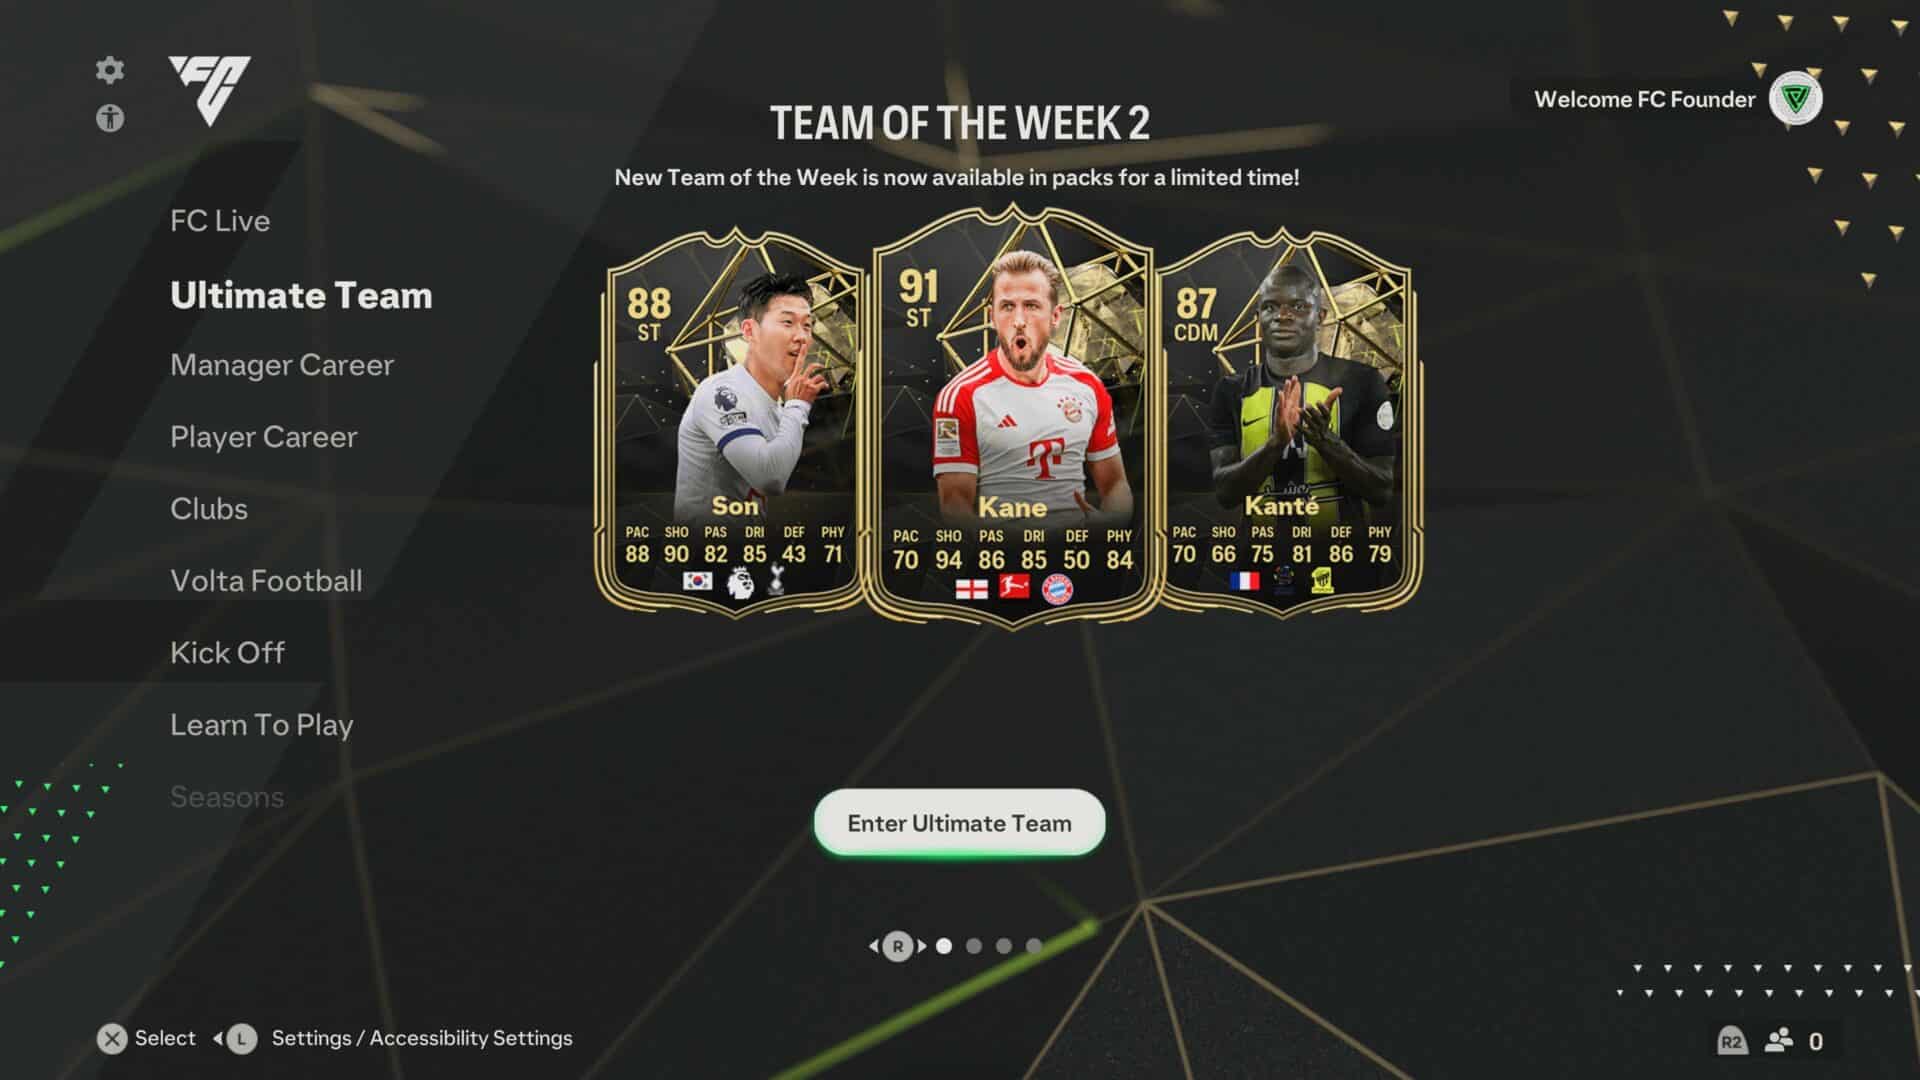 EA FC 24: TOTW 2 Full Squad, Featuring Kane, Son, and Kante